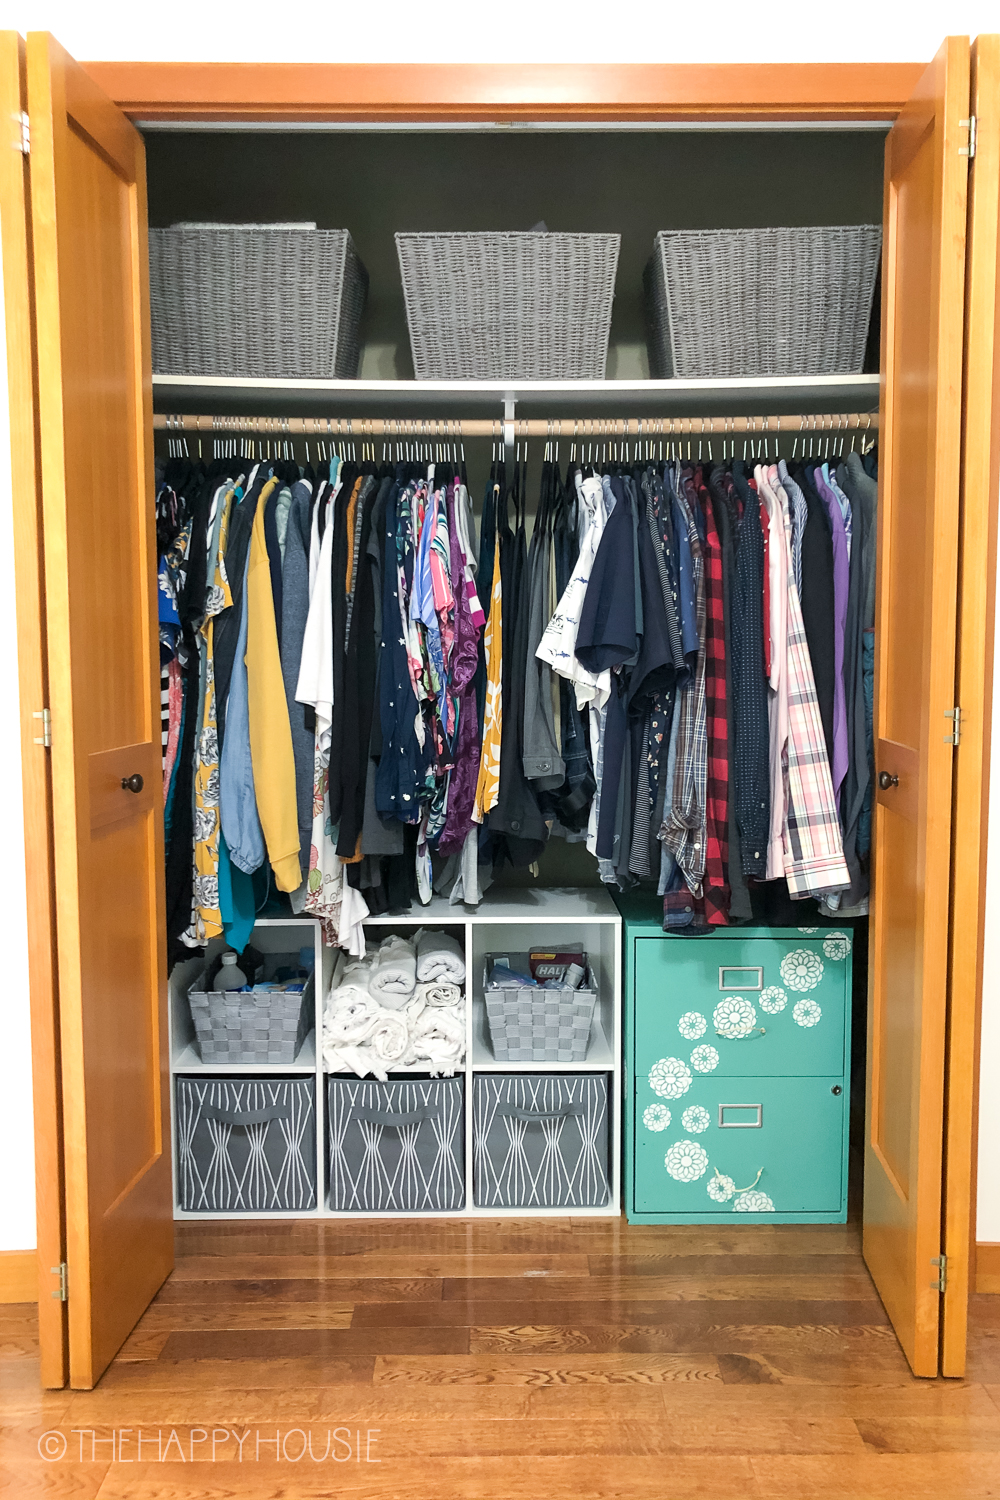 https://www.thehappyhousie.com/wp-content/uploads/2020/08/how-to-organize-a-small-reach-in-closet-for-multi-purpose-storage-6.jpg